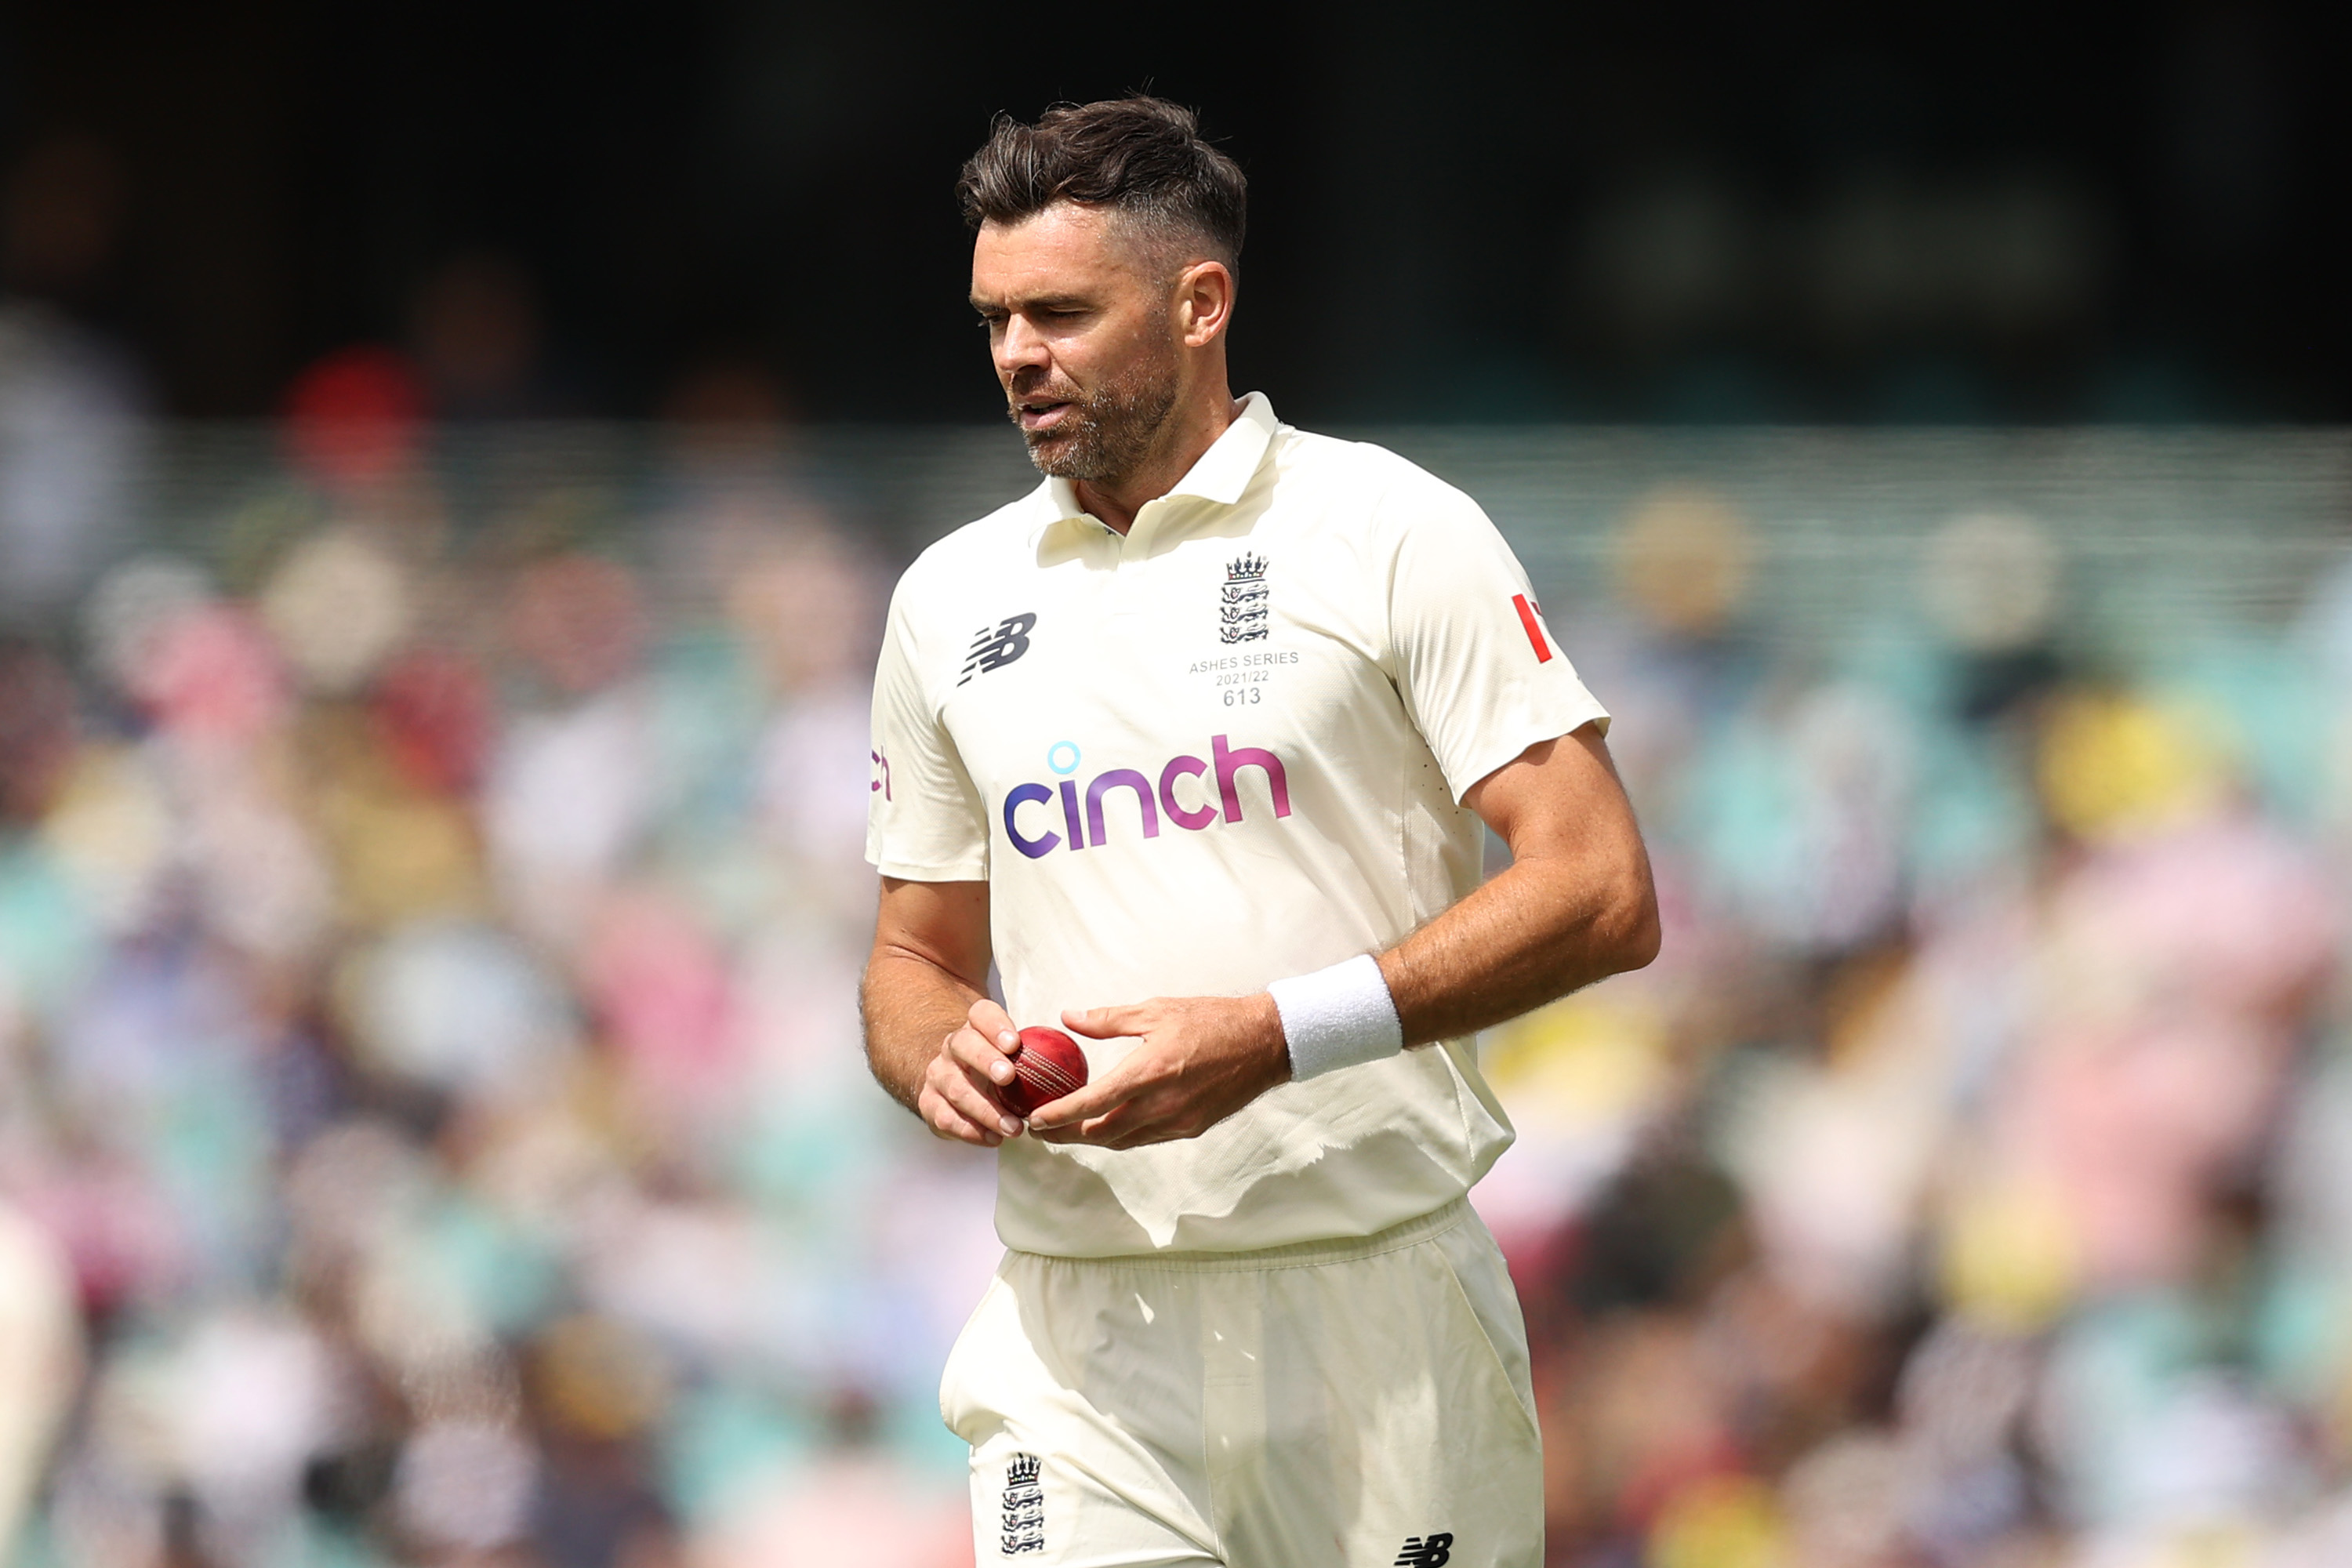 Jimmy Anderson responds to calls from Michael Vaughan for fast bowler to retire